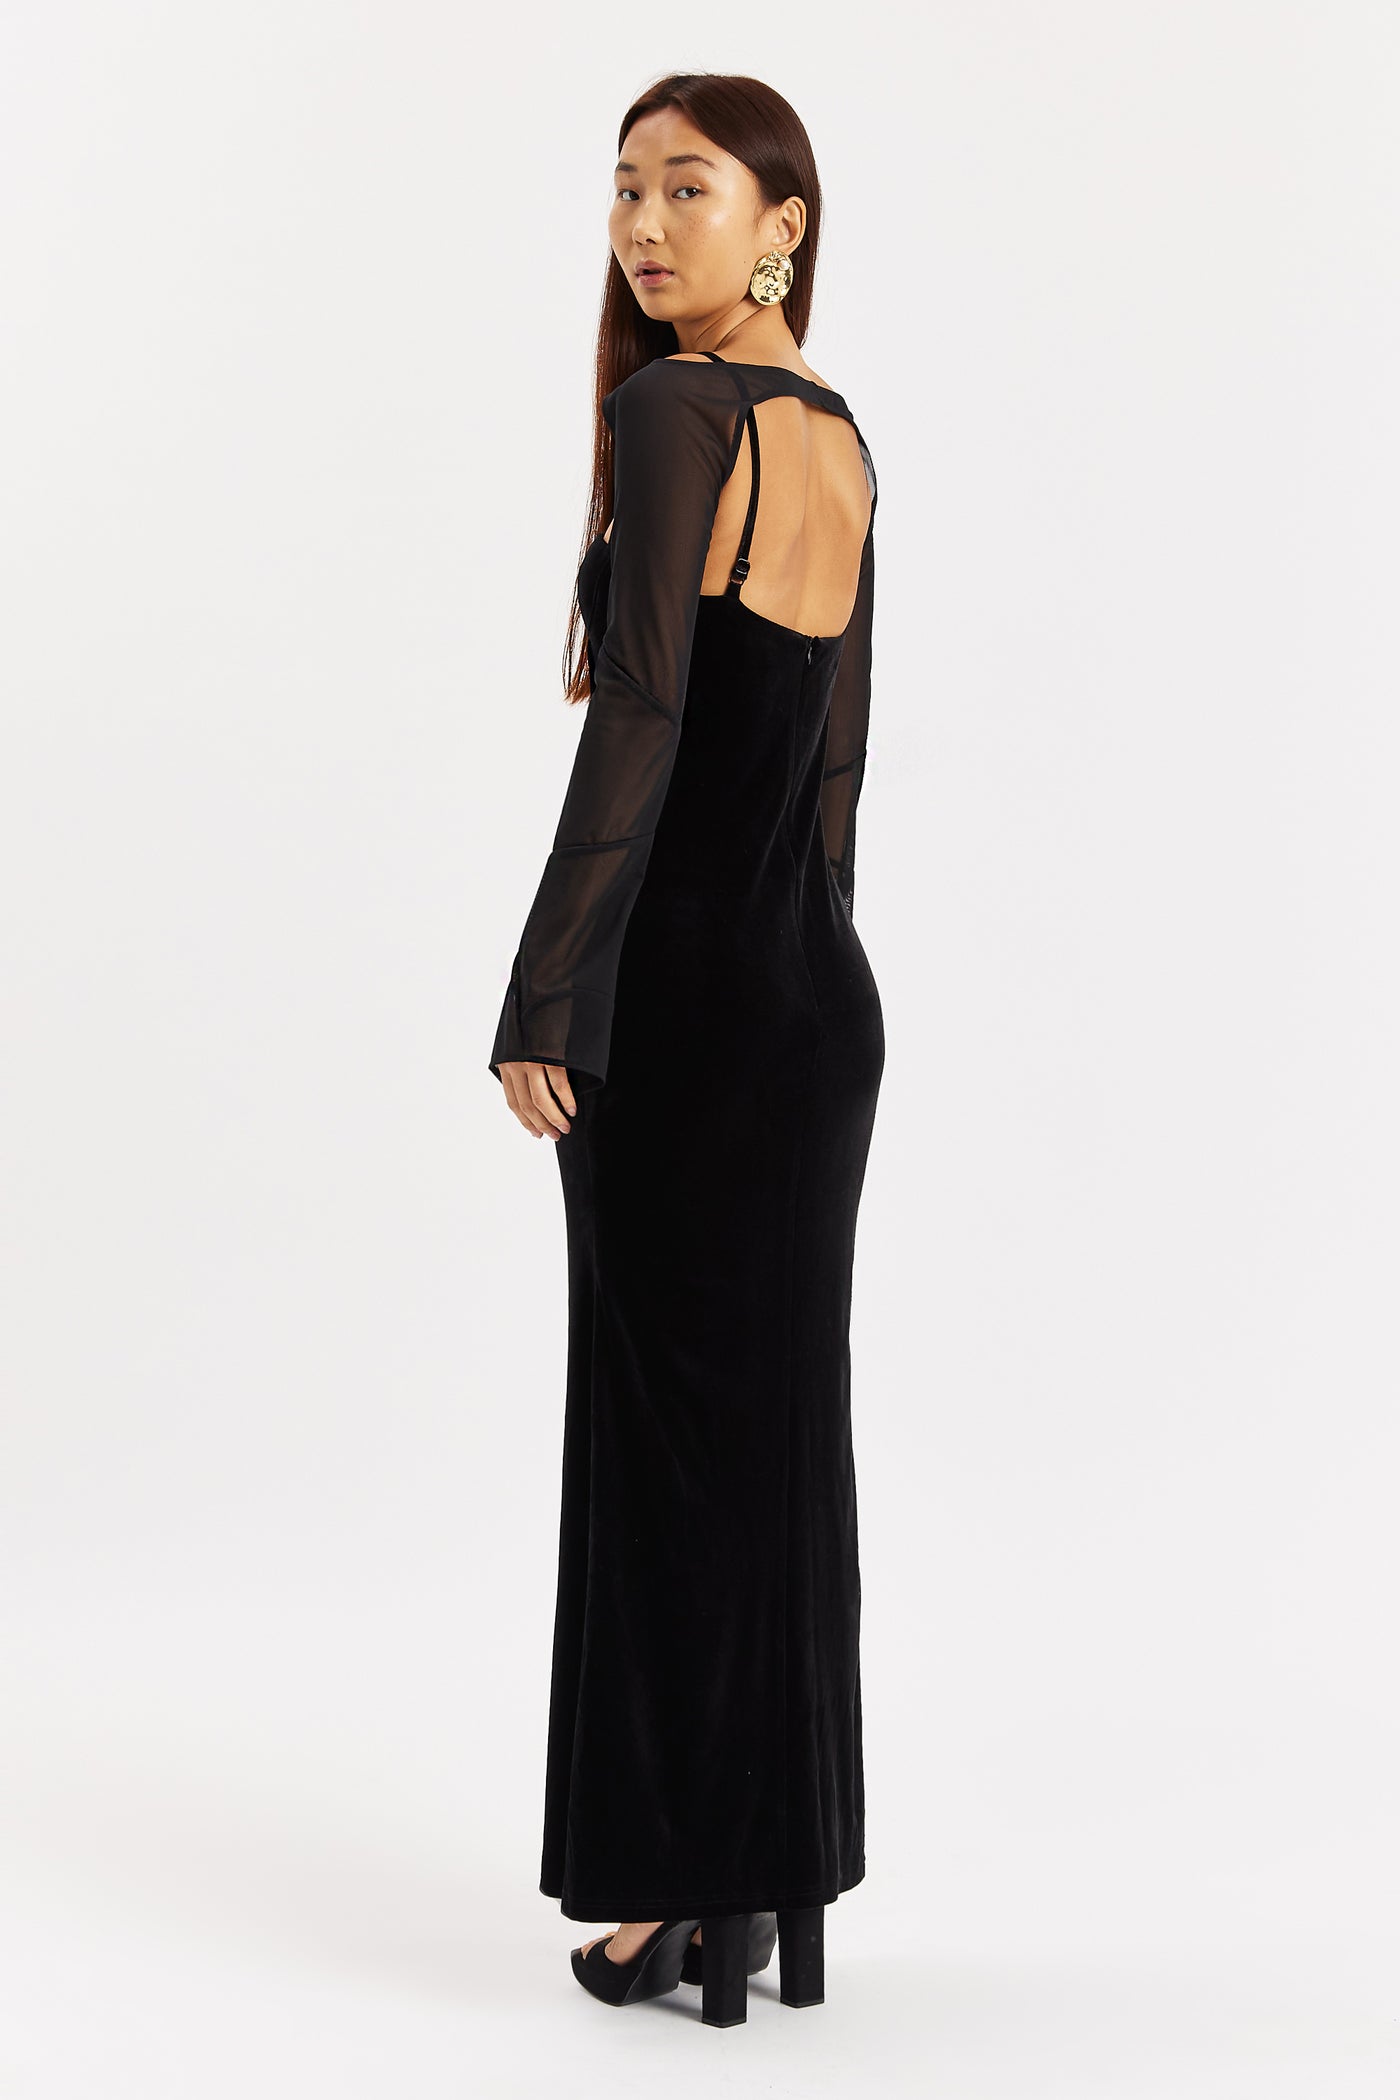 Panther Velvet Gina Gown